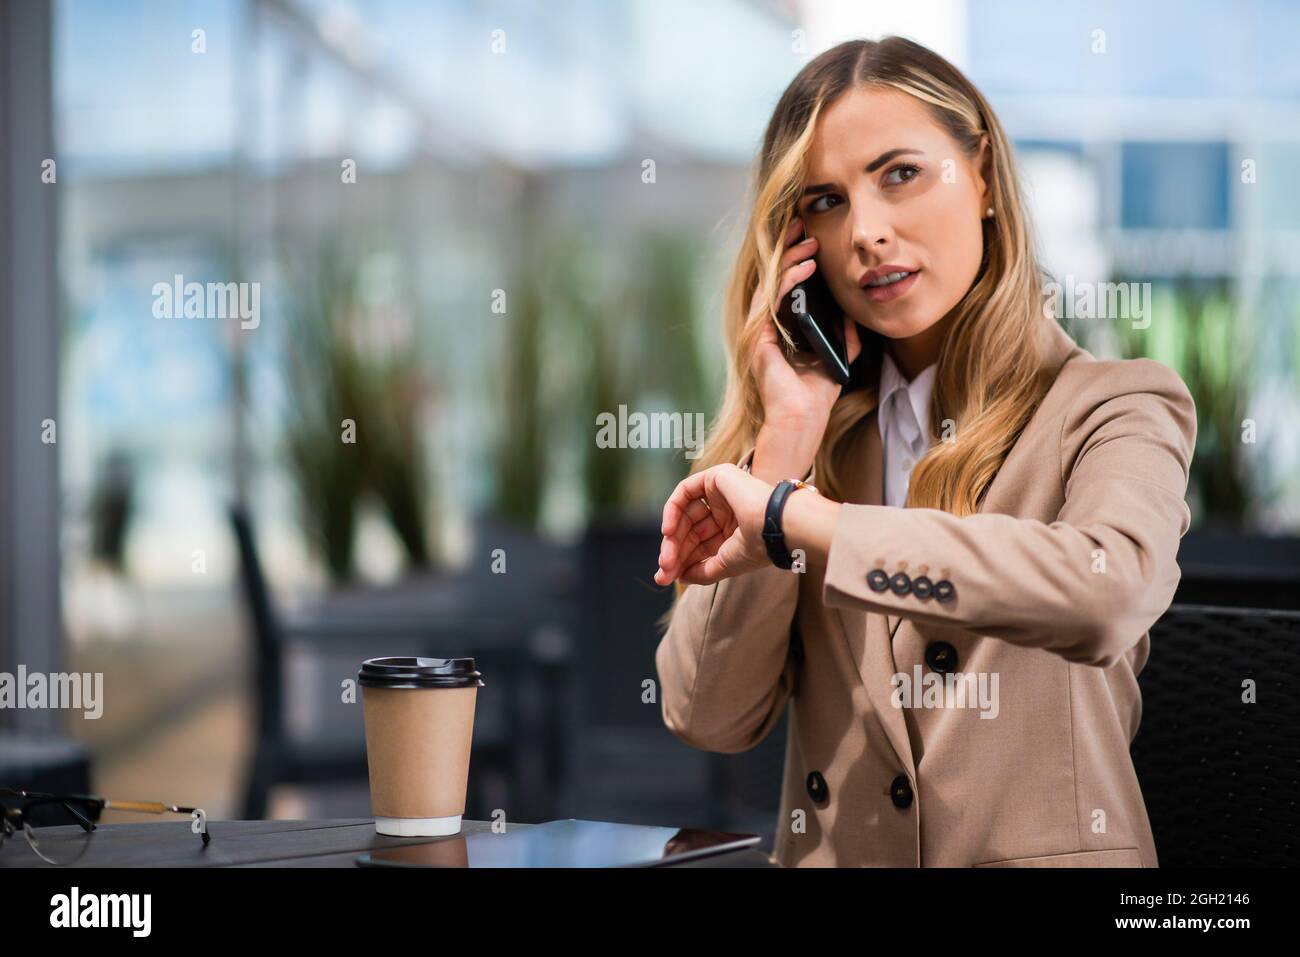 Woman looking at her watch while talking on her cellphone Stock Photo